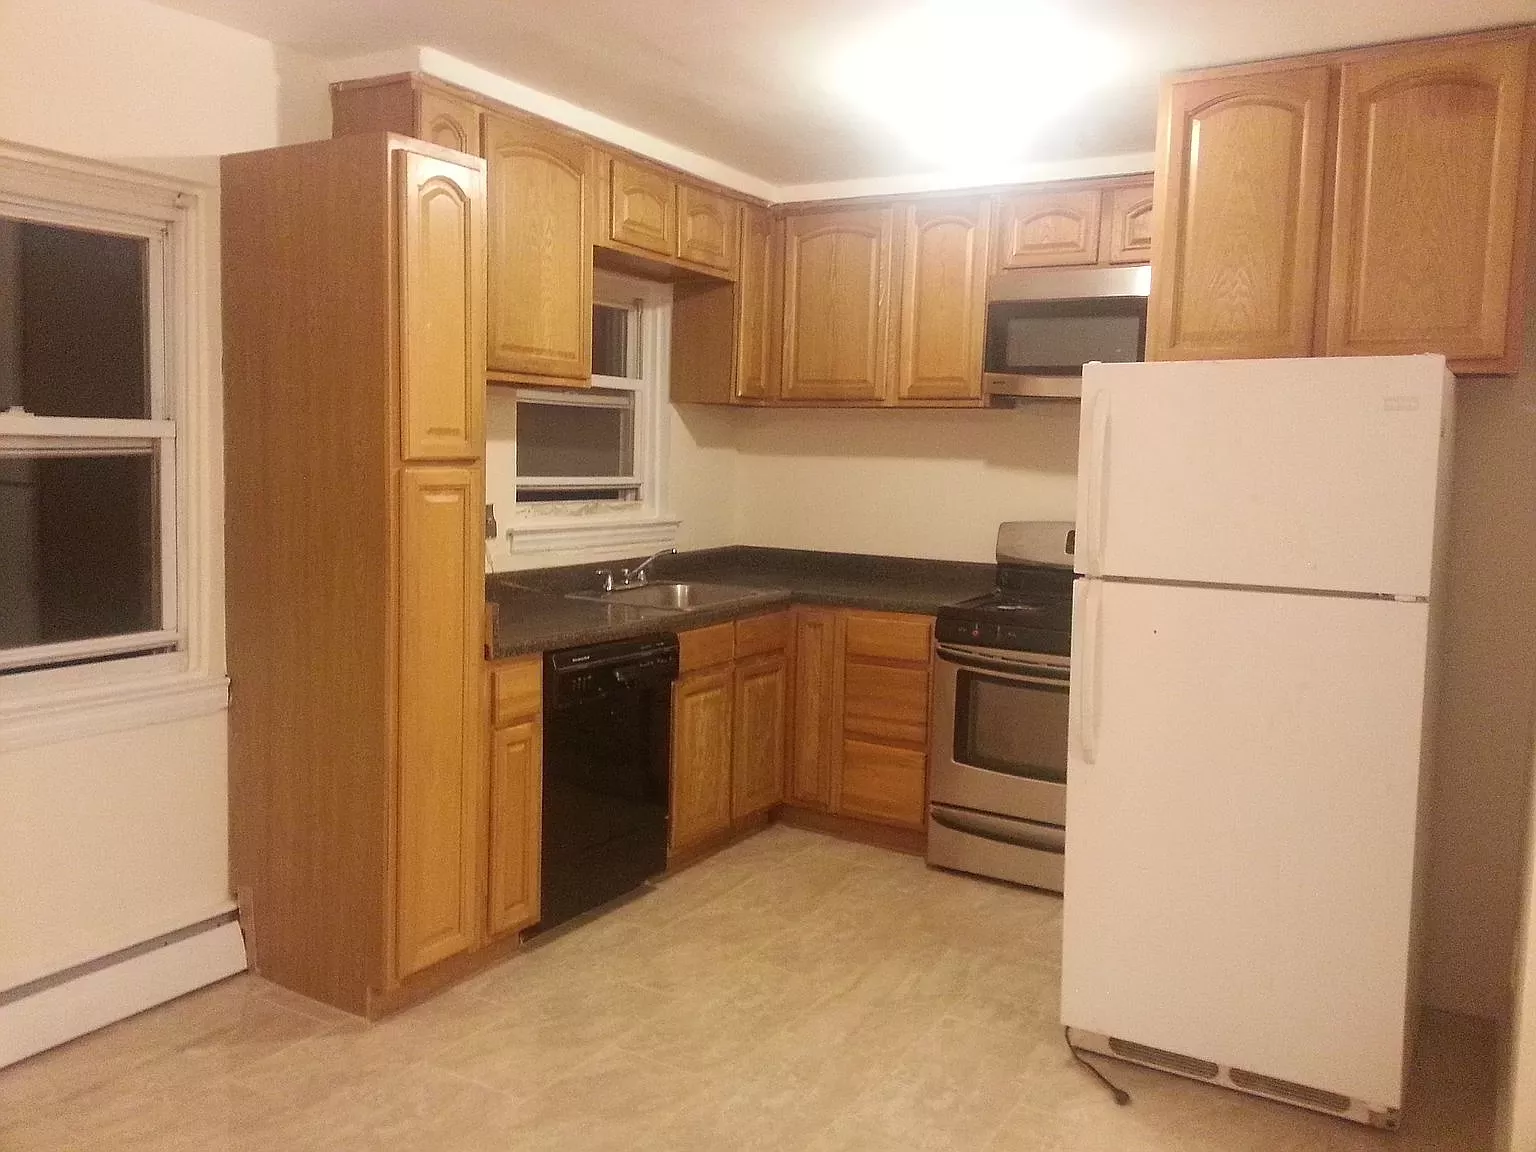 Apartment for Rent in Throggs Neck Bronx NY